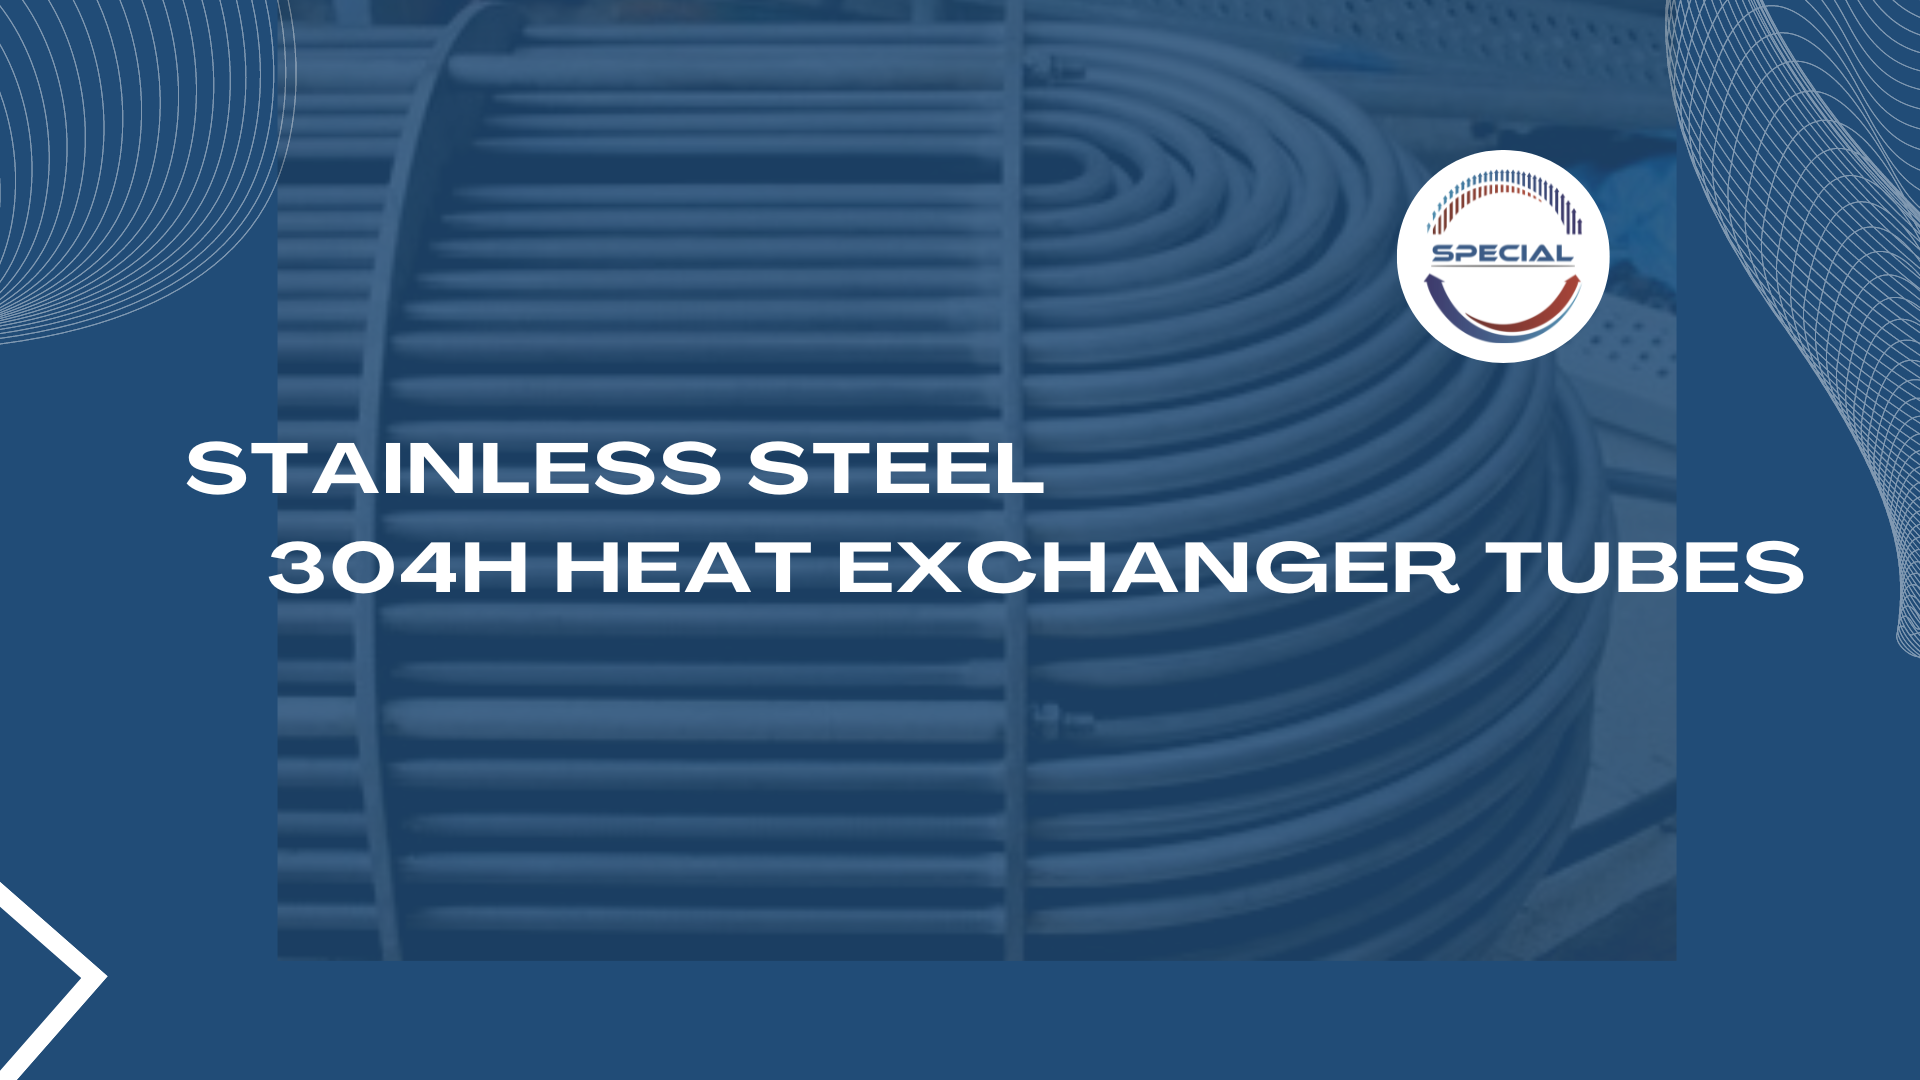 stainless steel 304H heat exchanger tubes